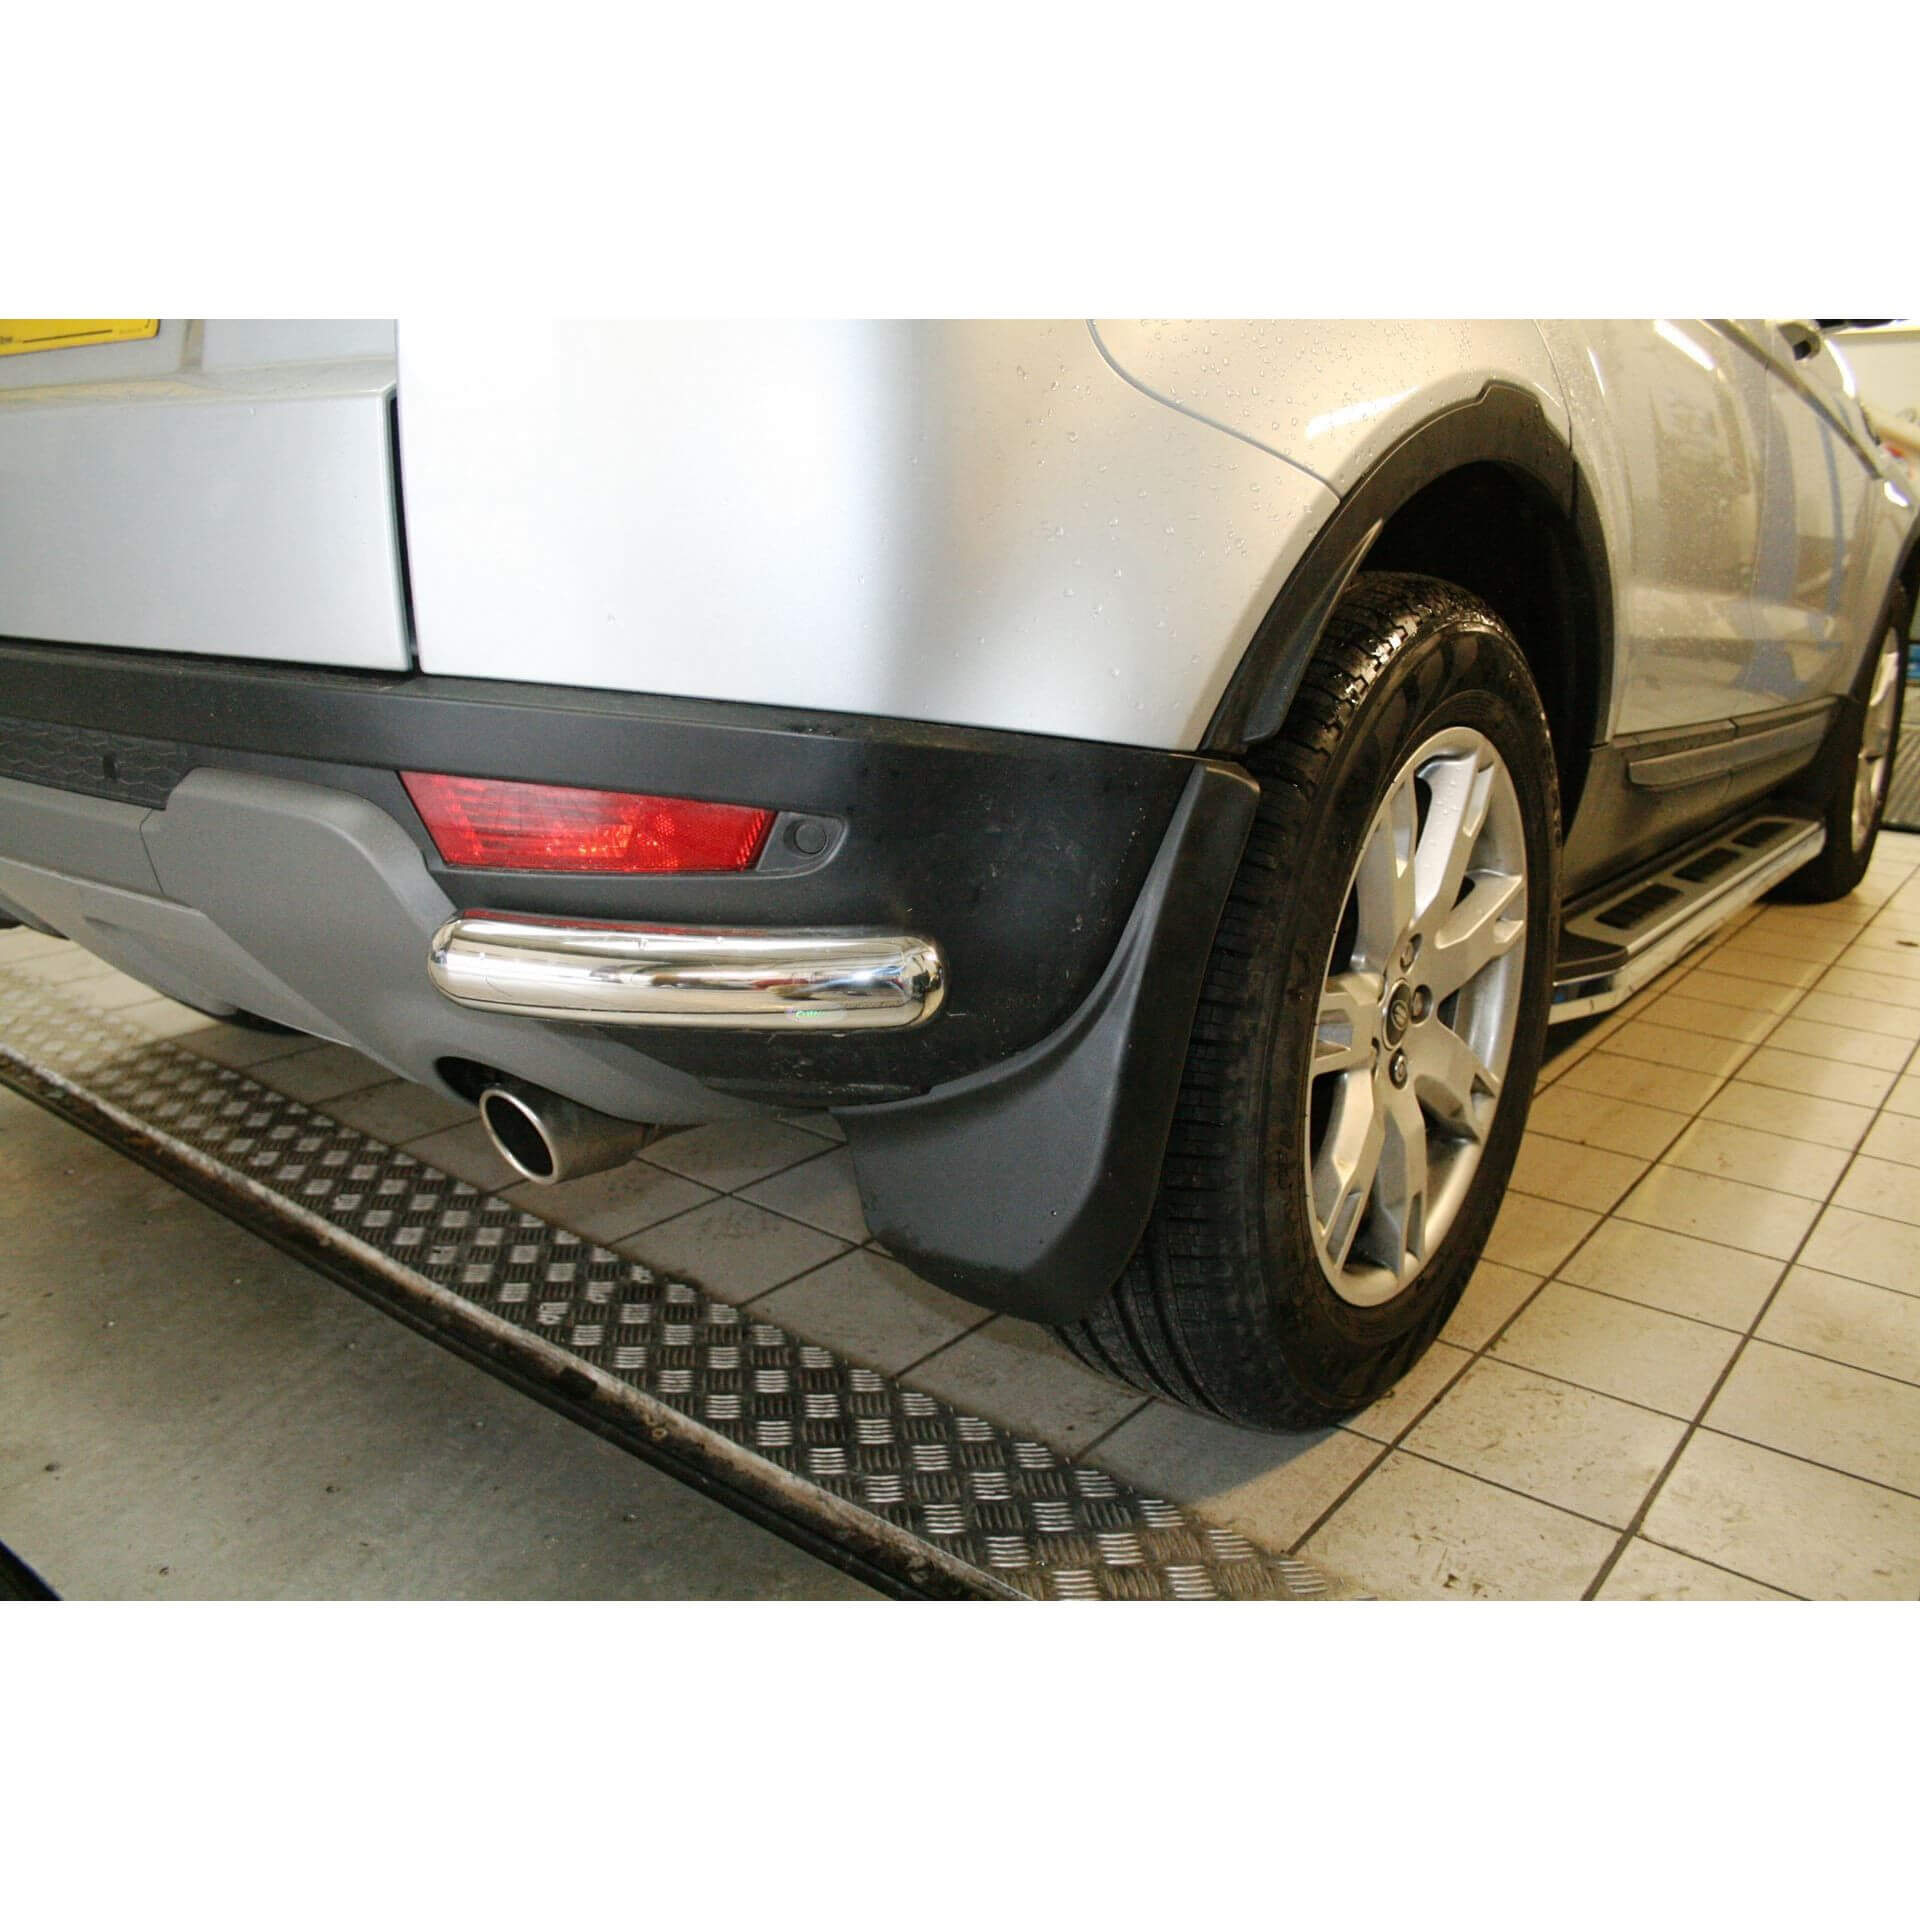 OE Style Mud Flaps Splash Guards for Range Rover Evoque Pure and Prestige 11-18 -  - sold by Direct4x4